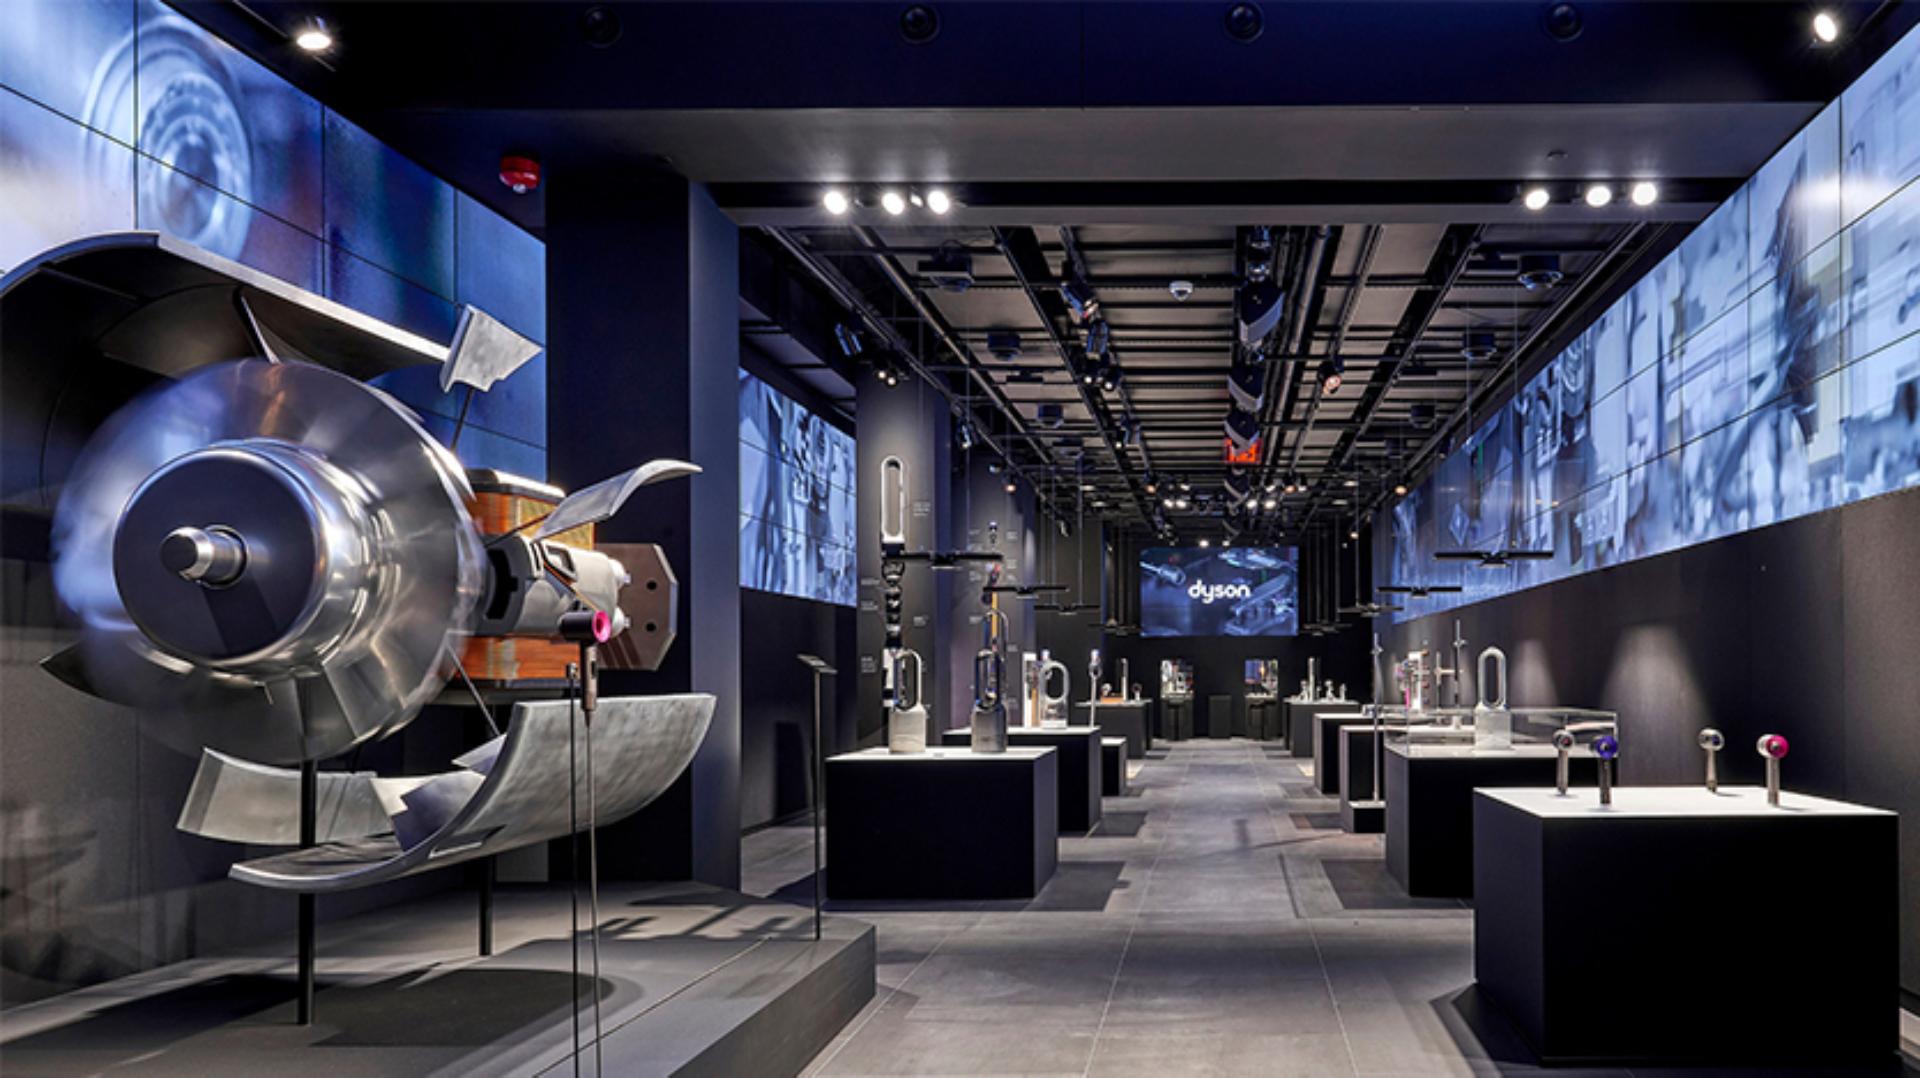 Inside the Dyson Demo Store in New York